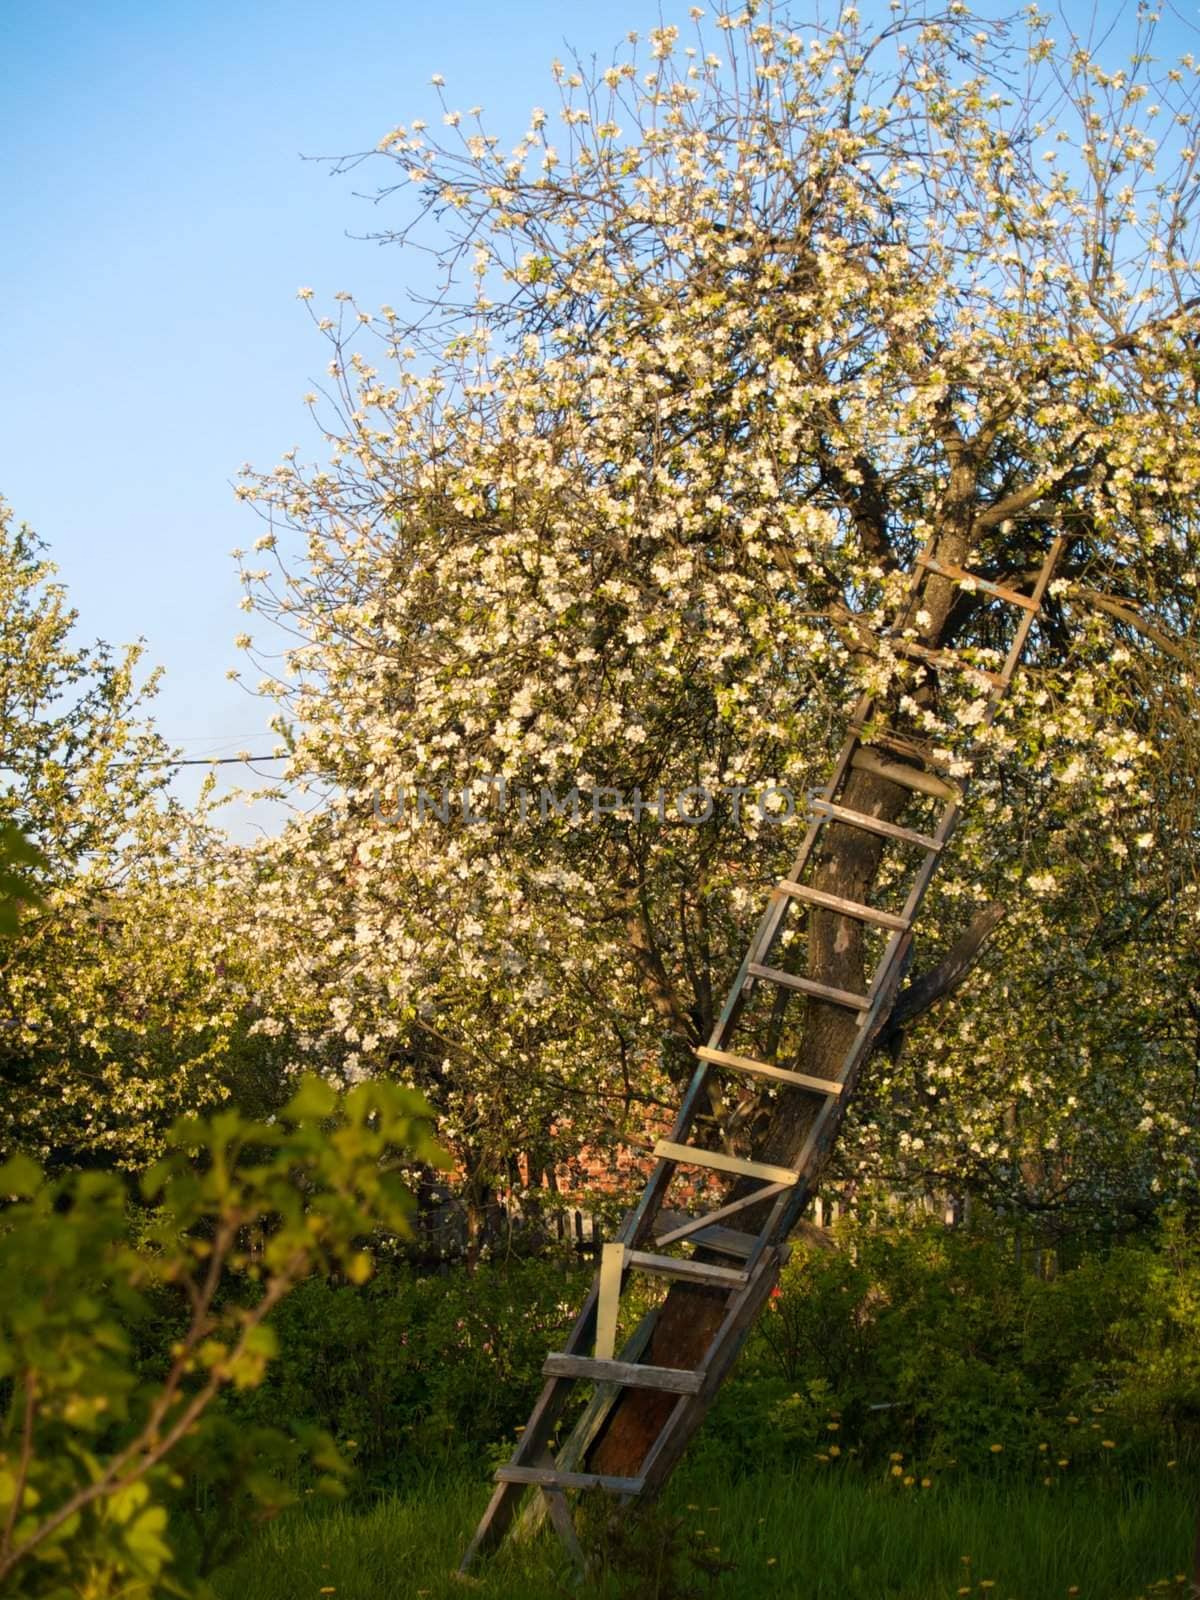 Apple-tree in spring with upward ladder